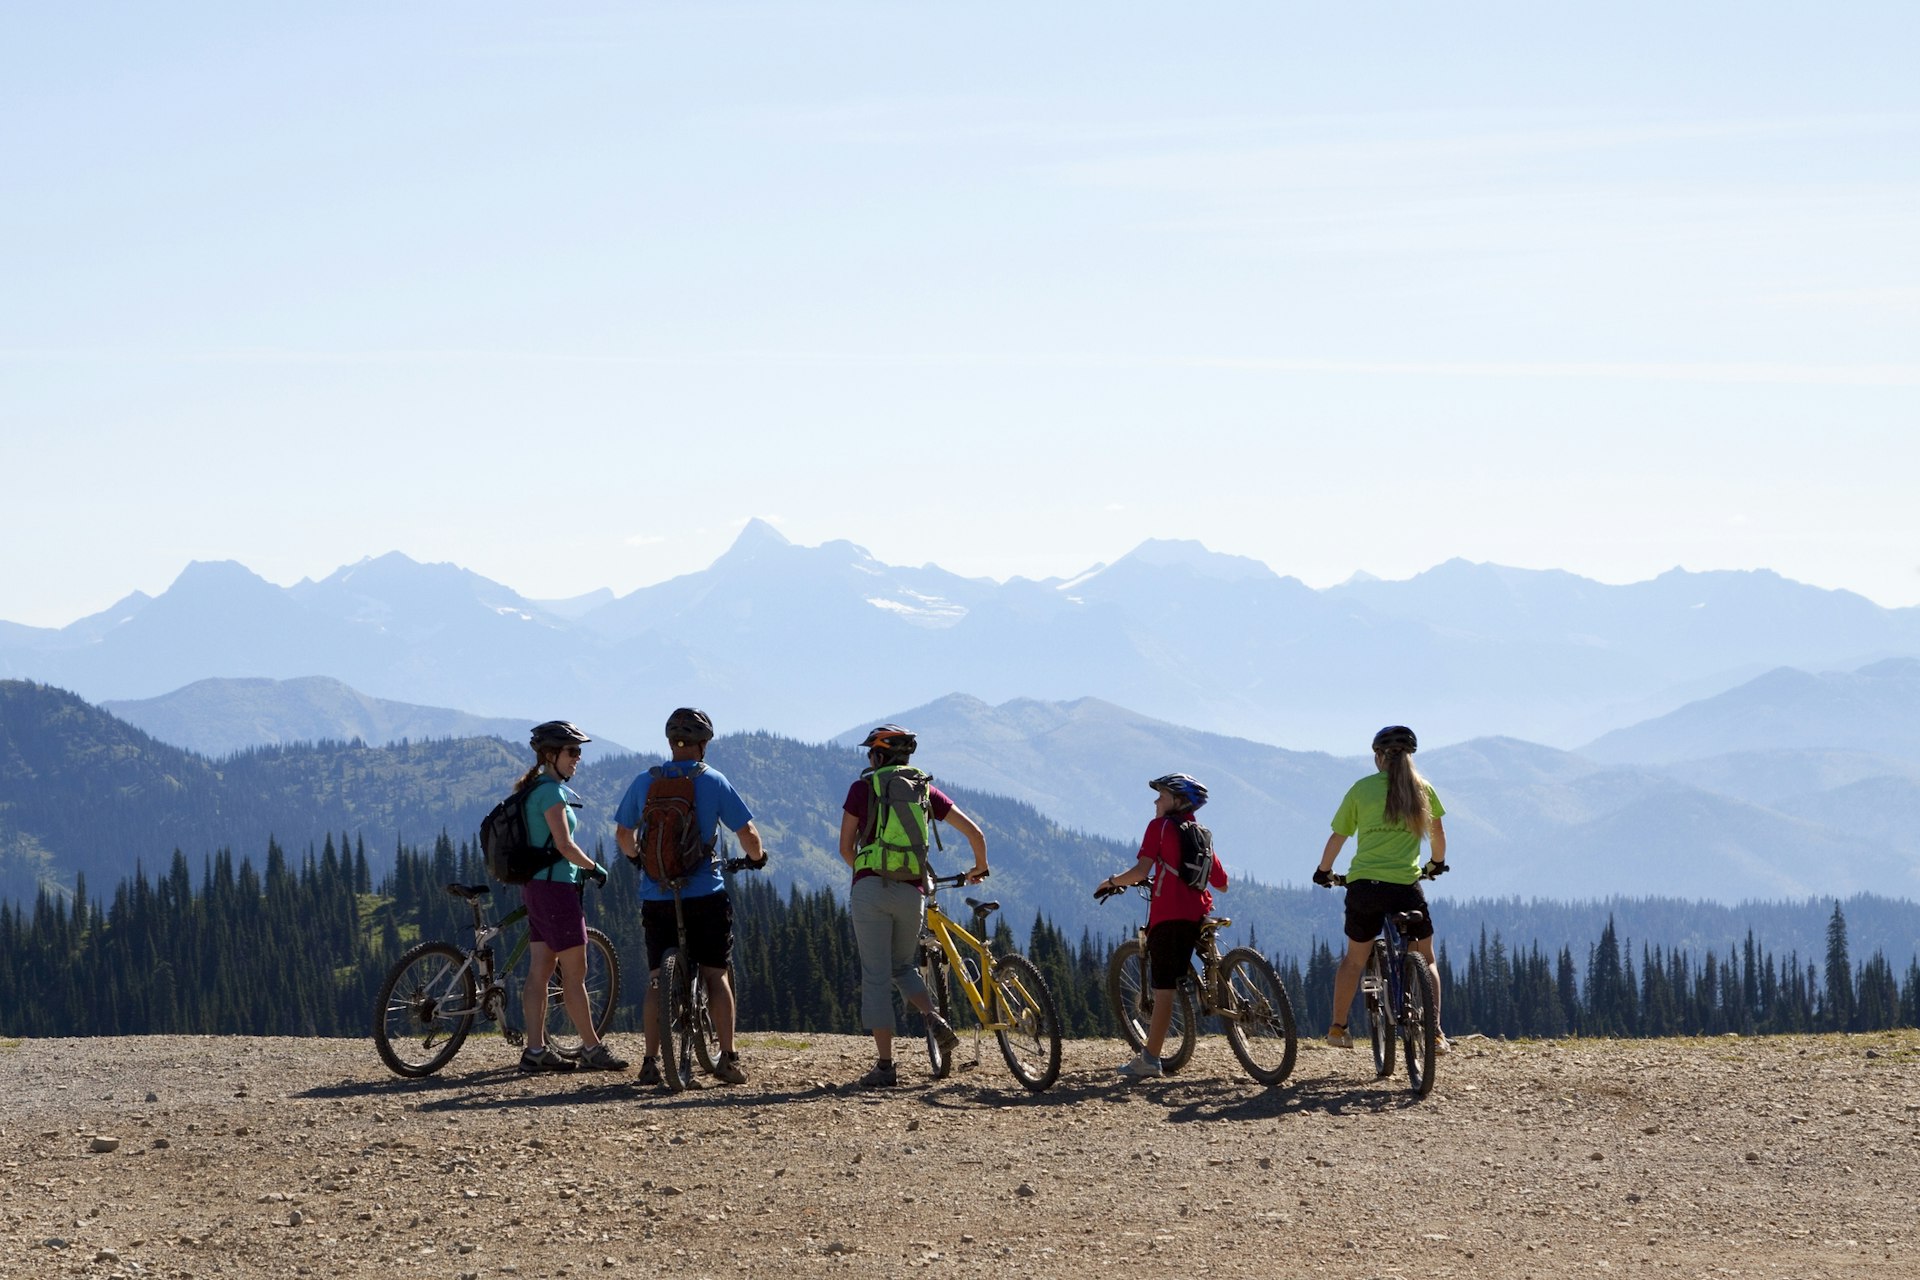 A family stand with bikes in Whitefish, Montana during summer.